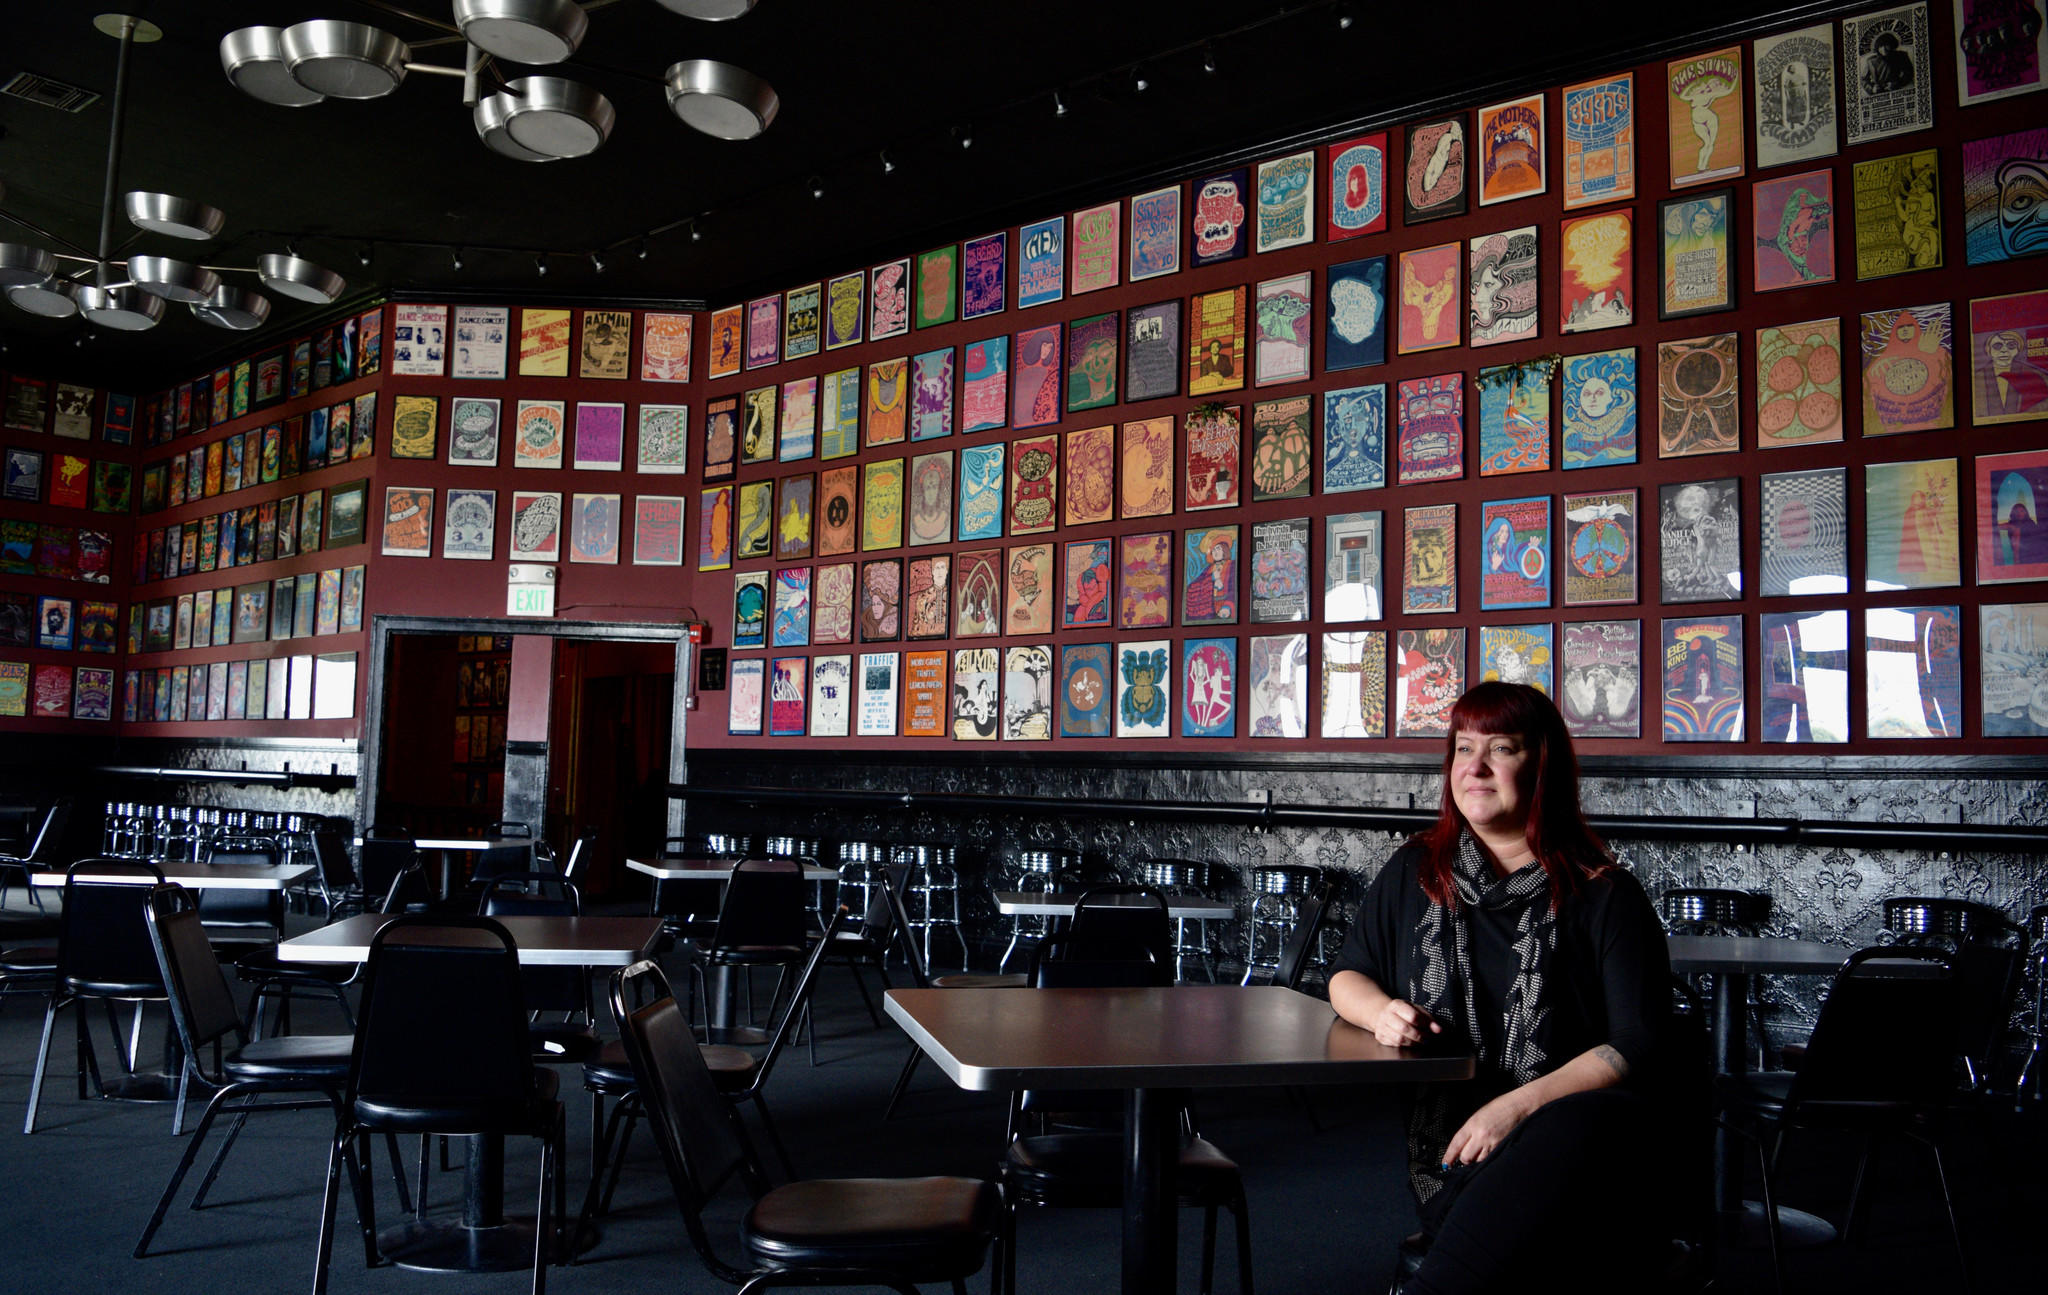 Amie Bailey-Knobler, general manager of the Fillmore in San Francisco, is shown in its Poster Room, where hundreds of concerts from over the decades are represented on the walls.